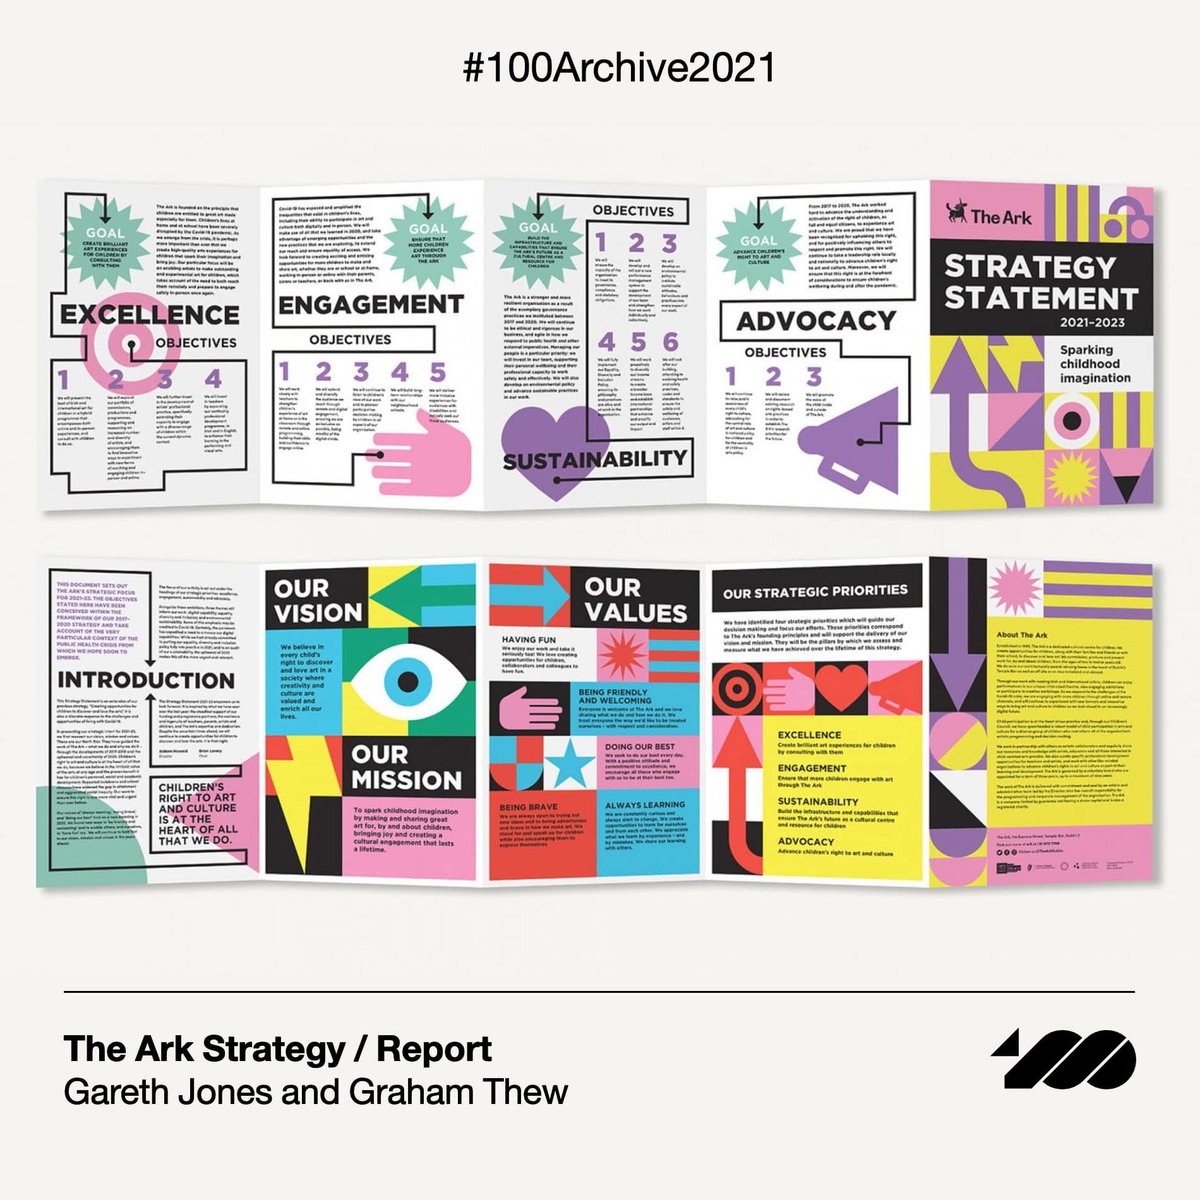 If you're a designer in Ireland or an Irish designer overseas, get your recent communication design projects in the 100 Archive pile by 31.01.23!⁠ The Ark Strategy / Report⁠ Selected for #100archive2021 and designed by @gazjonesdesign and @GrahamThew for @TheArkDublin